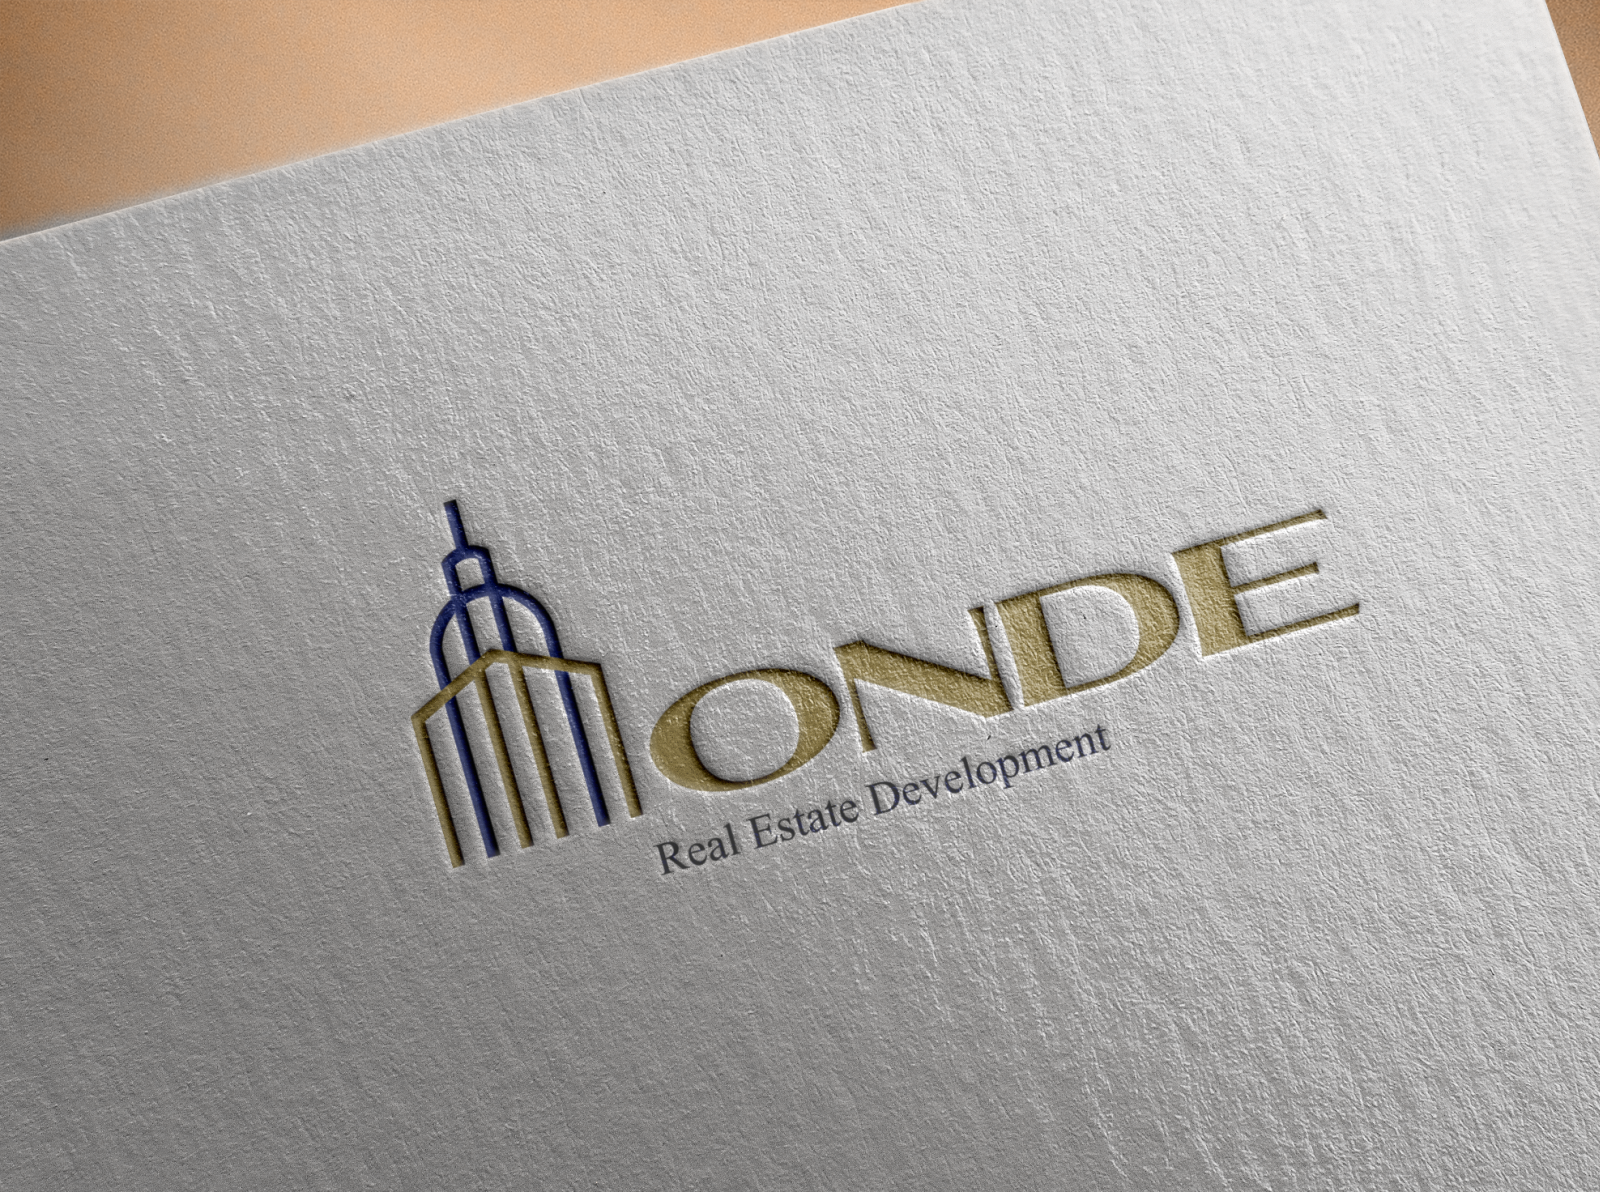 Free Logo Mockup PSD on Textured paper by Ahmed Gaballa on Dribbble